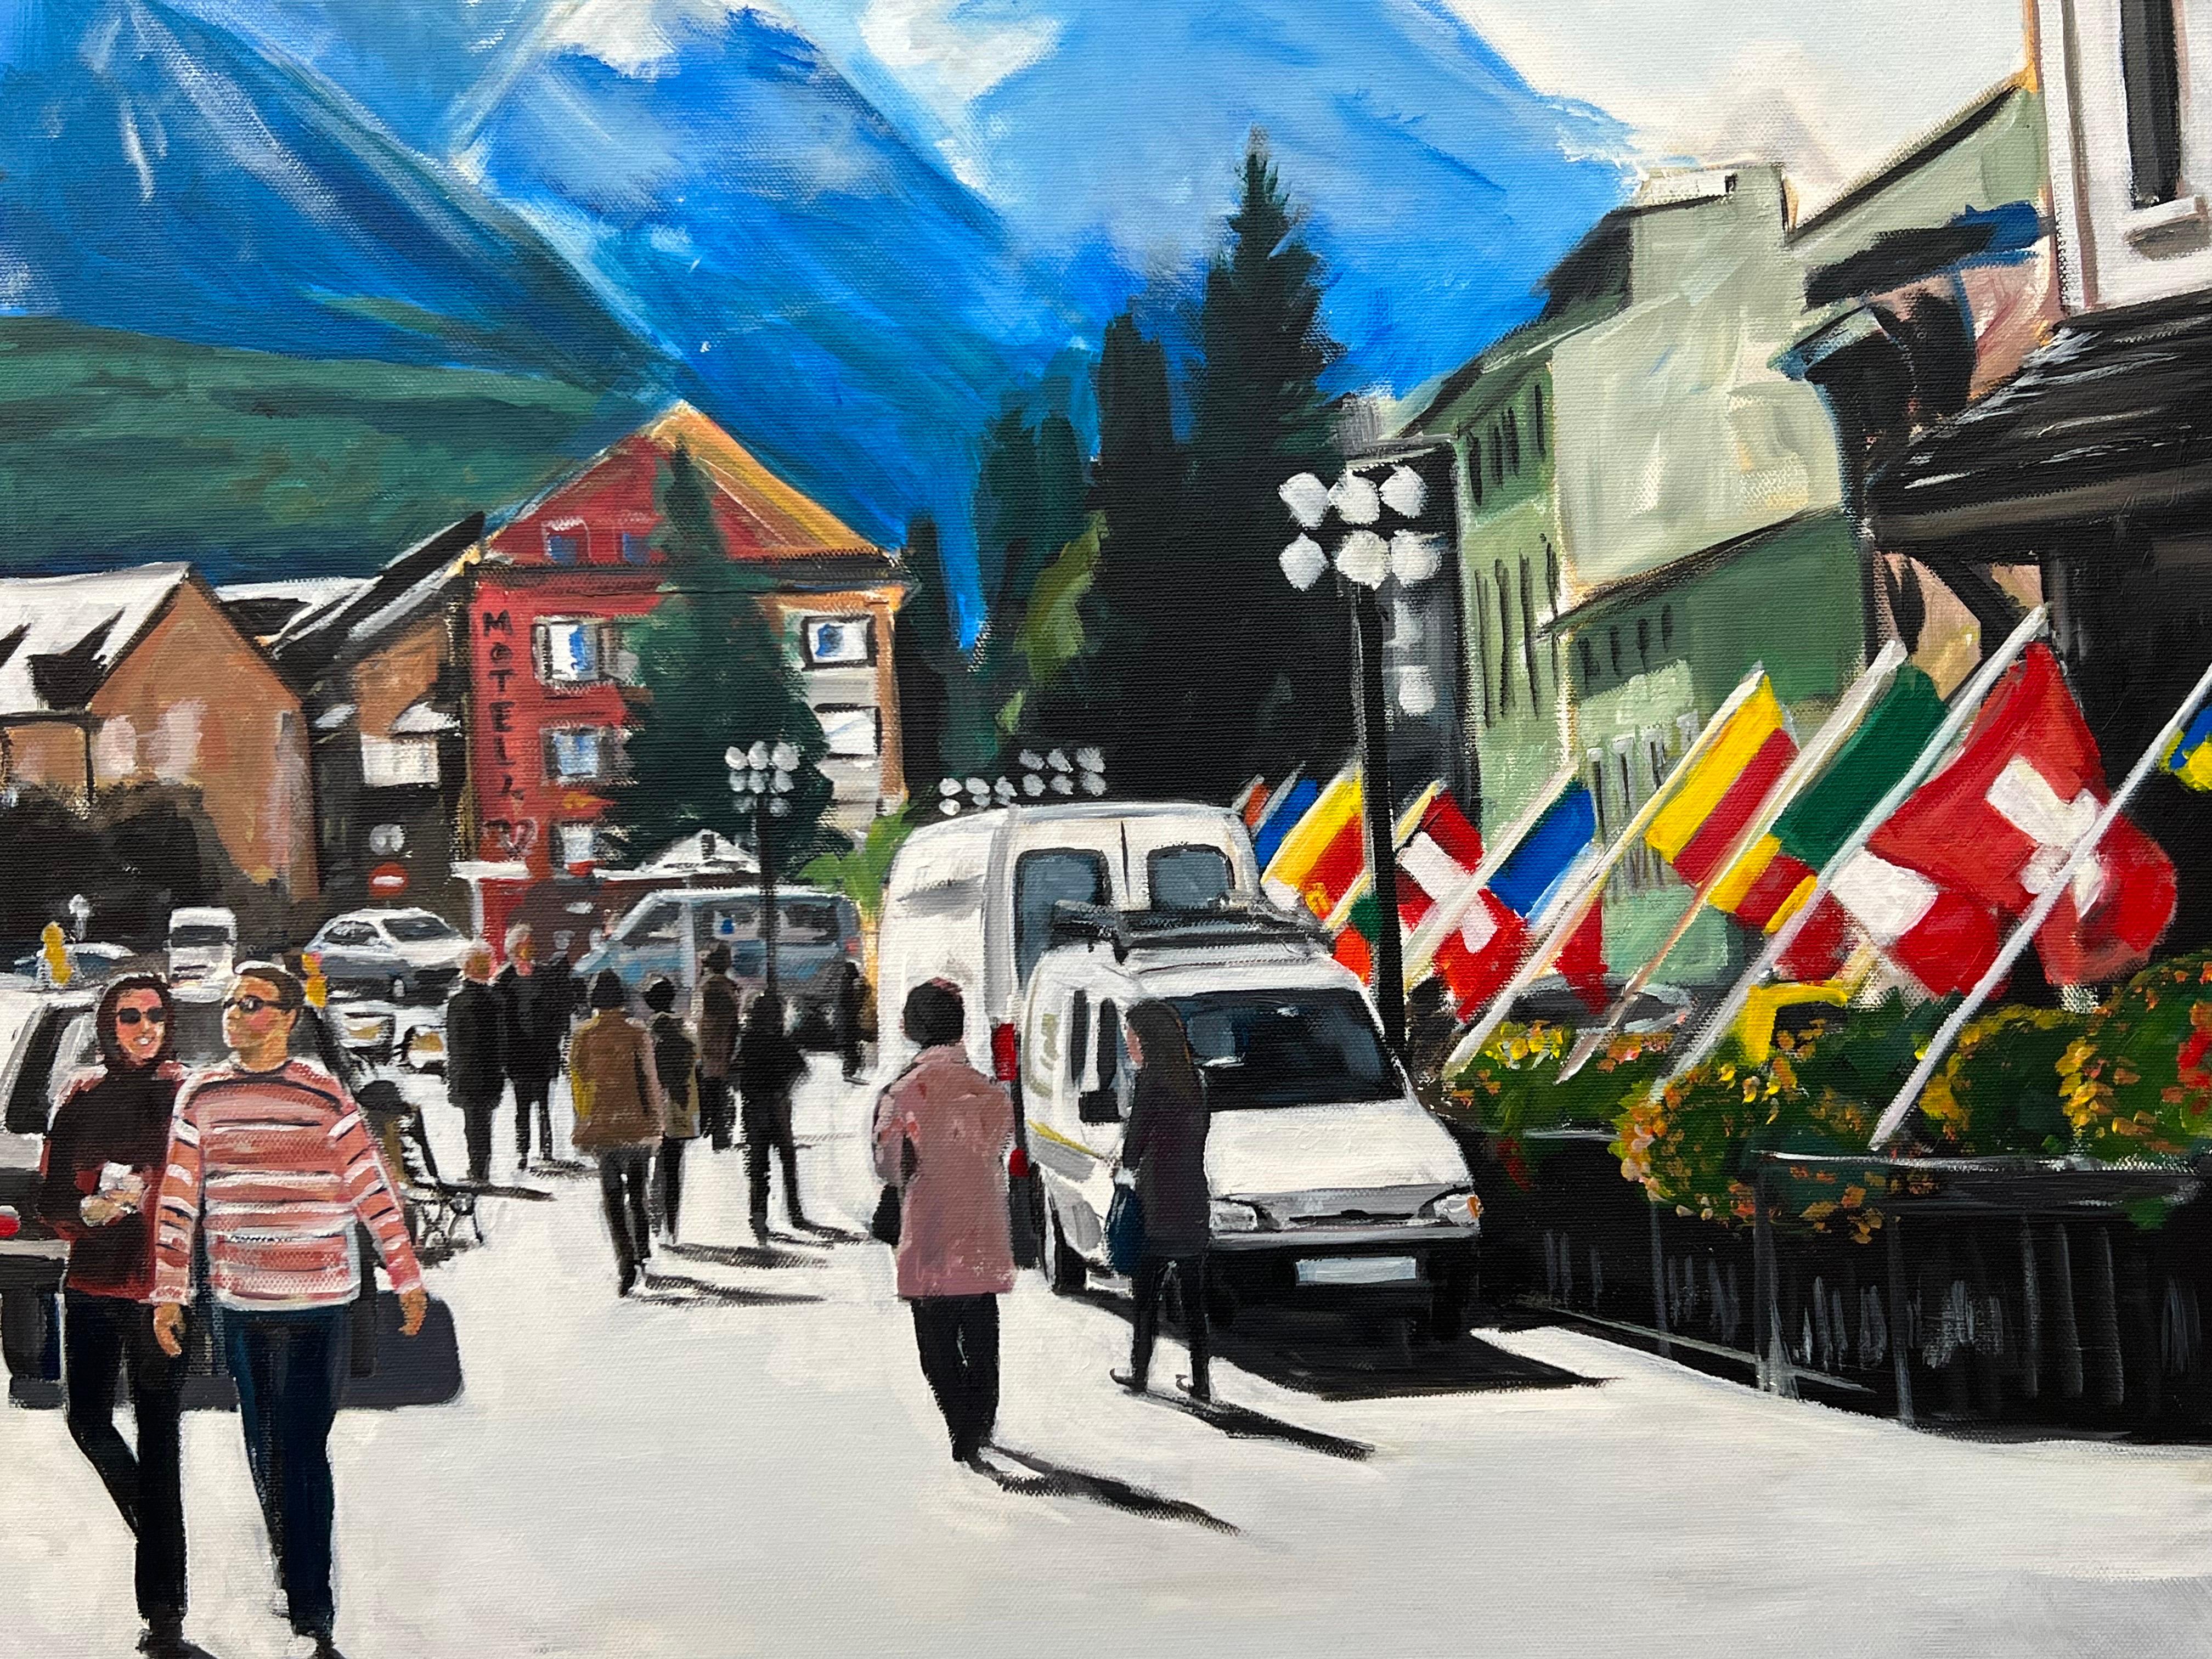 Large Original Painting of Chamonix Mont Blanc in France by Contemporary British Artist, Angela Wakefield. European Series No.4. 

Art measures 48 x 36 inches
Frame measures 53 x 41 inches 

During 2012, Angela embarked upon her European Series,